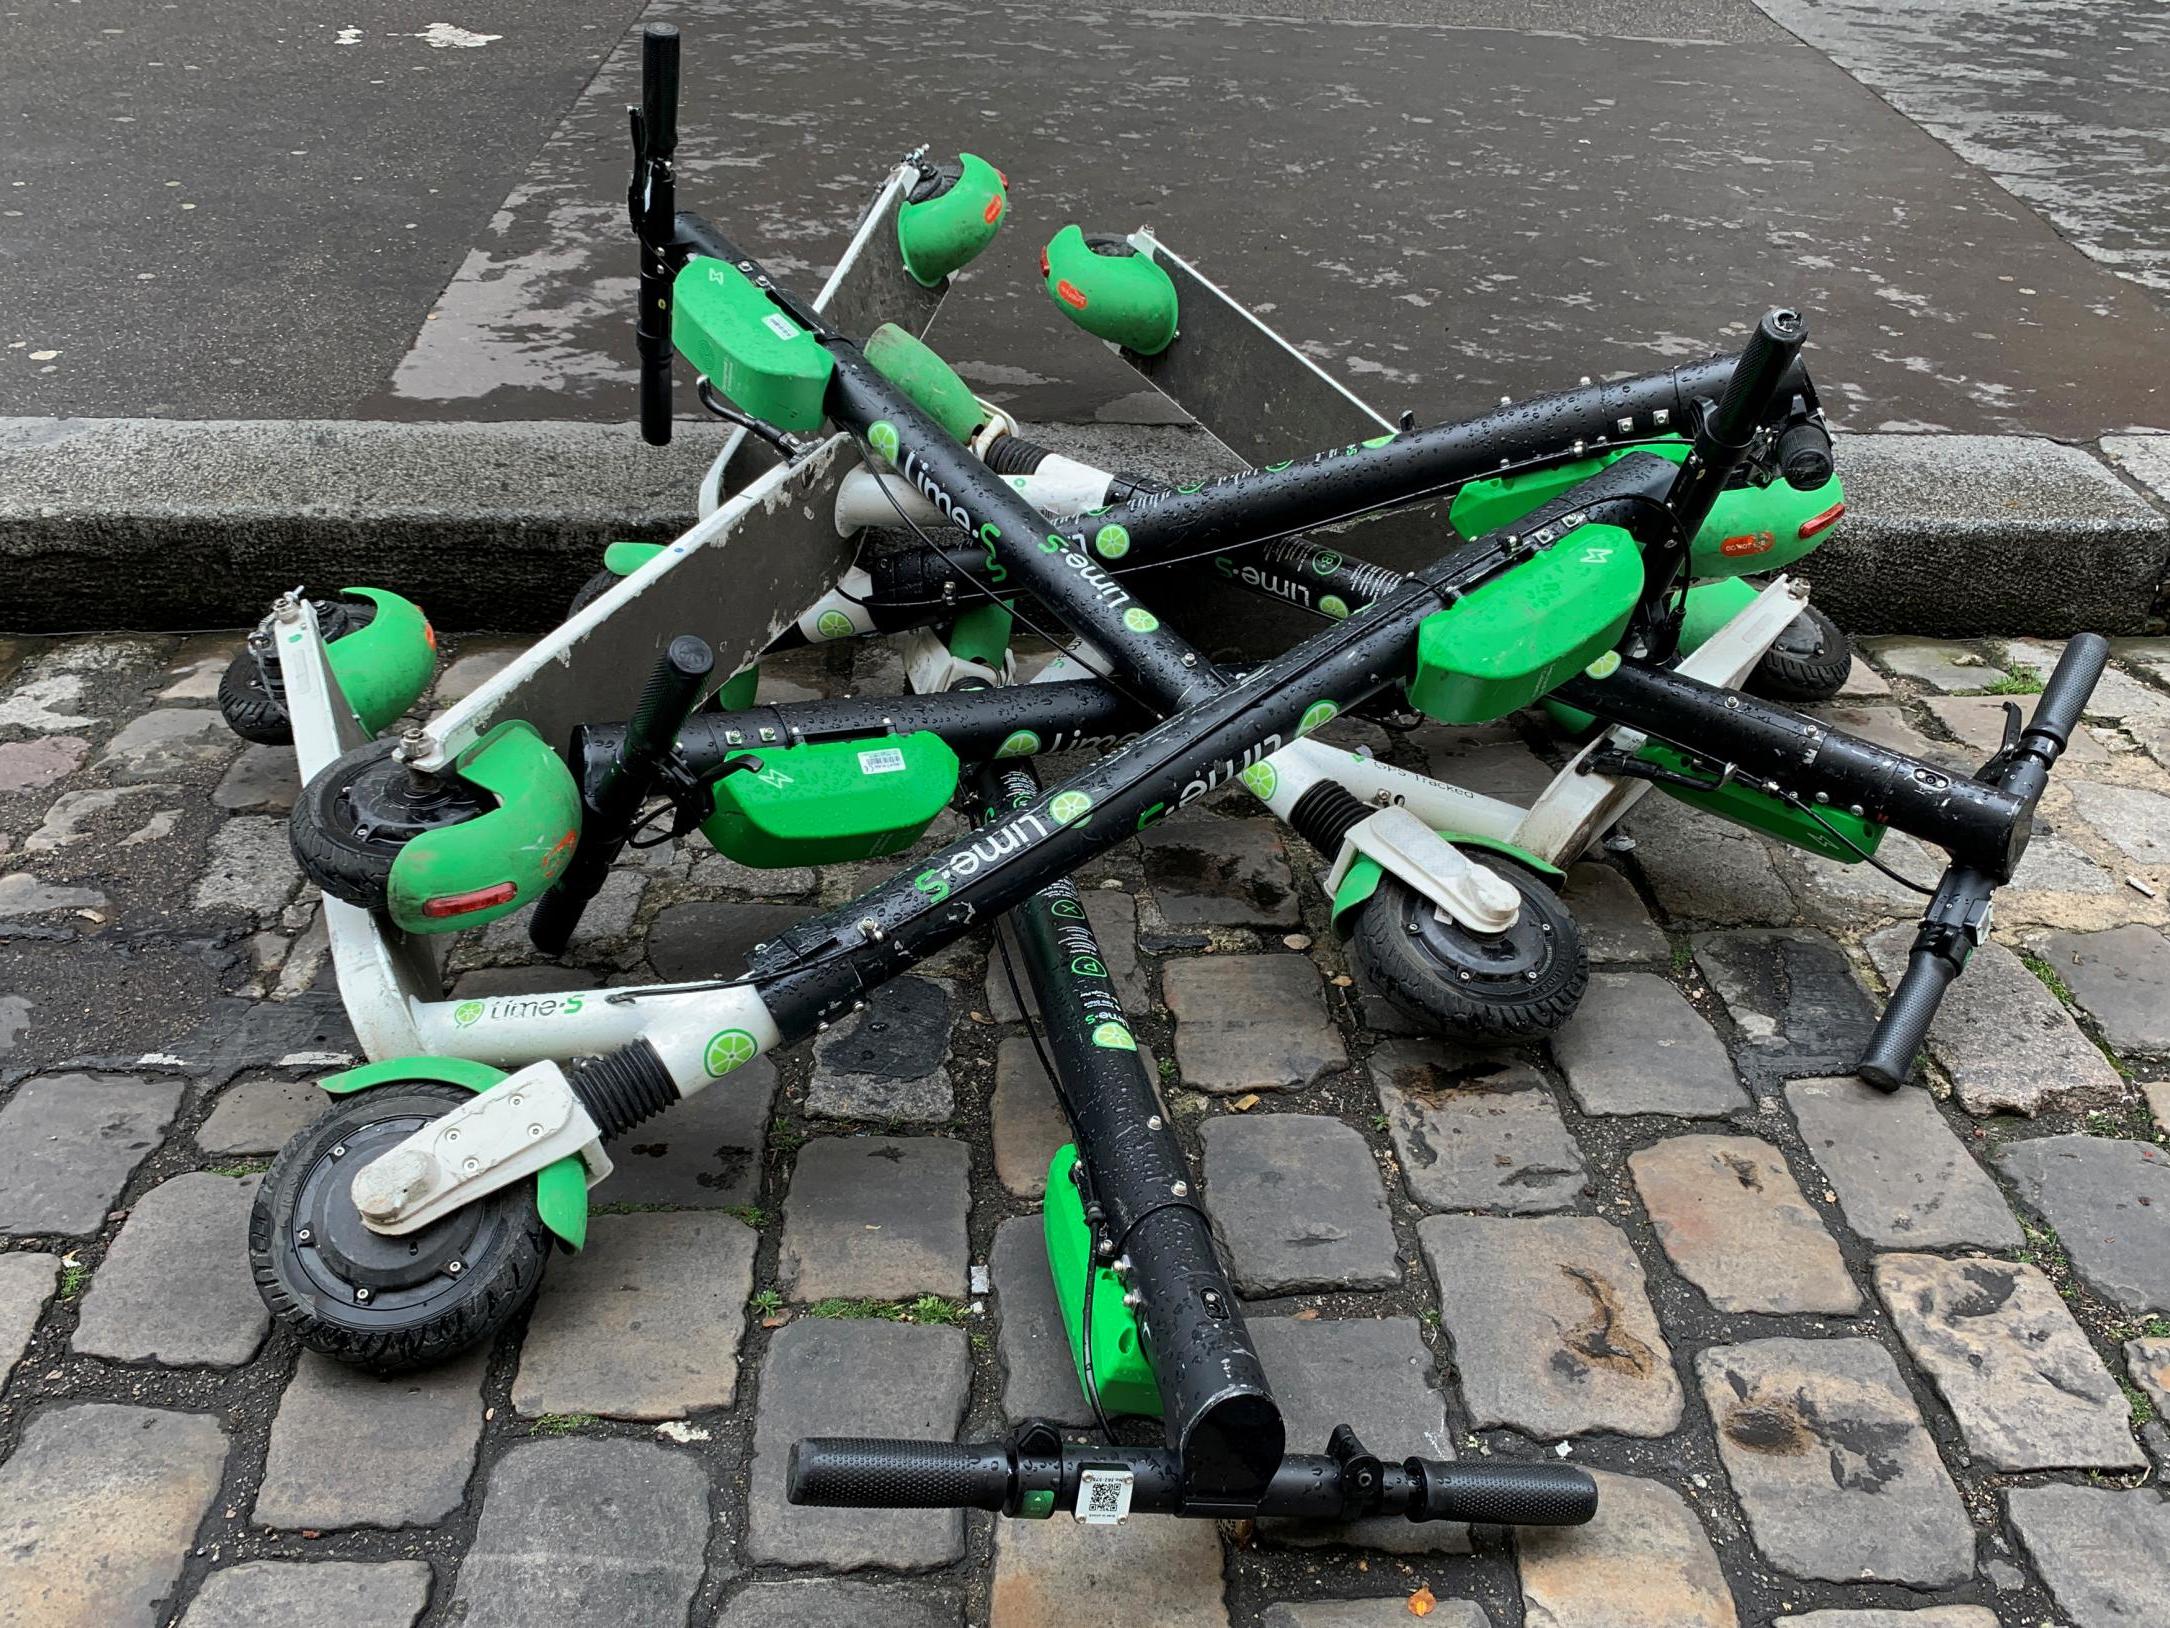 Alternativt forslag Kent Pekkadillo Lisbon battles scourge of electric scooters abandoned on streets | The  Independent | The Independent